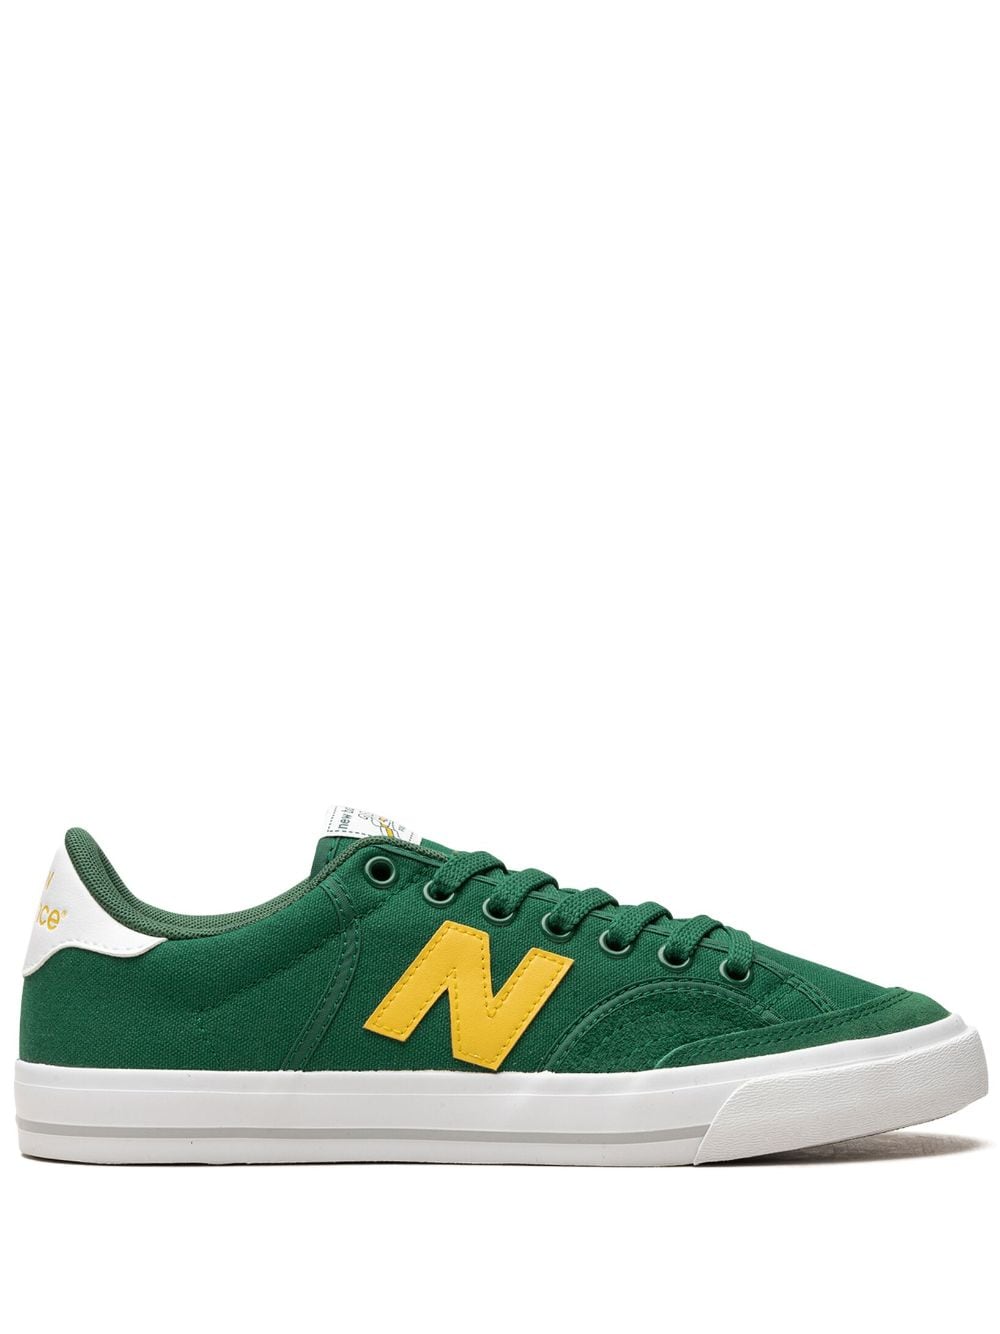 New Balance Numeric 212 Pro Court "Green/Yellow" sneakers